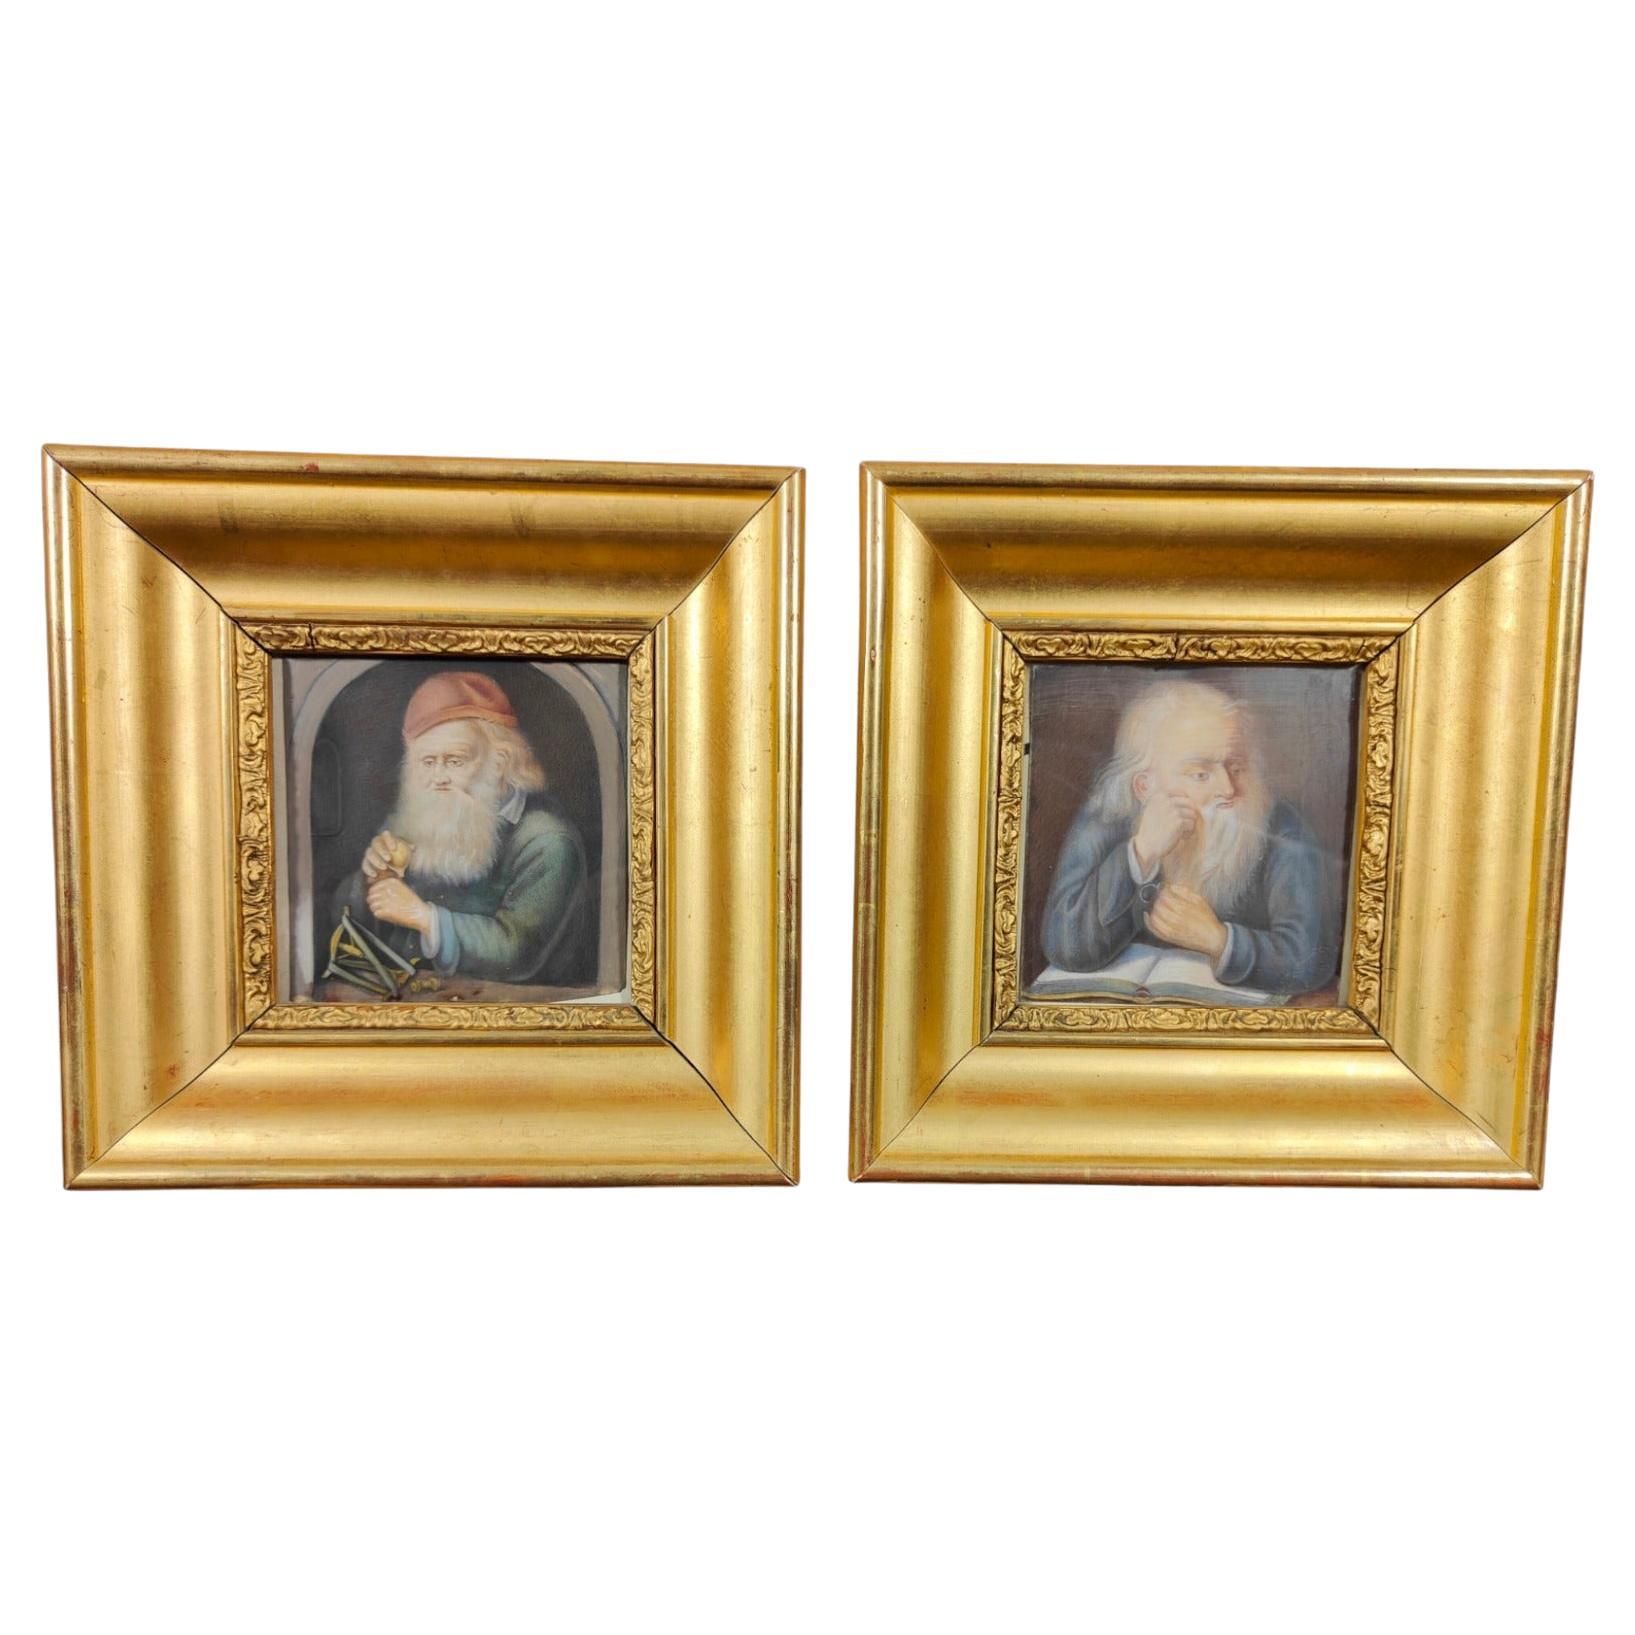 Pair of Portraits on Ivory 19th Century